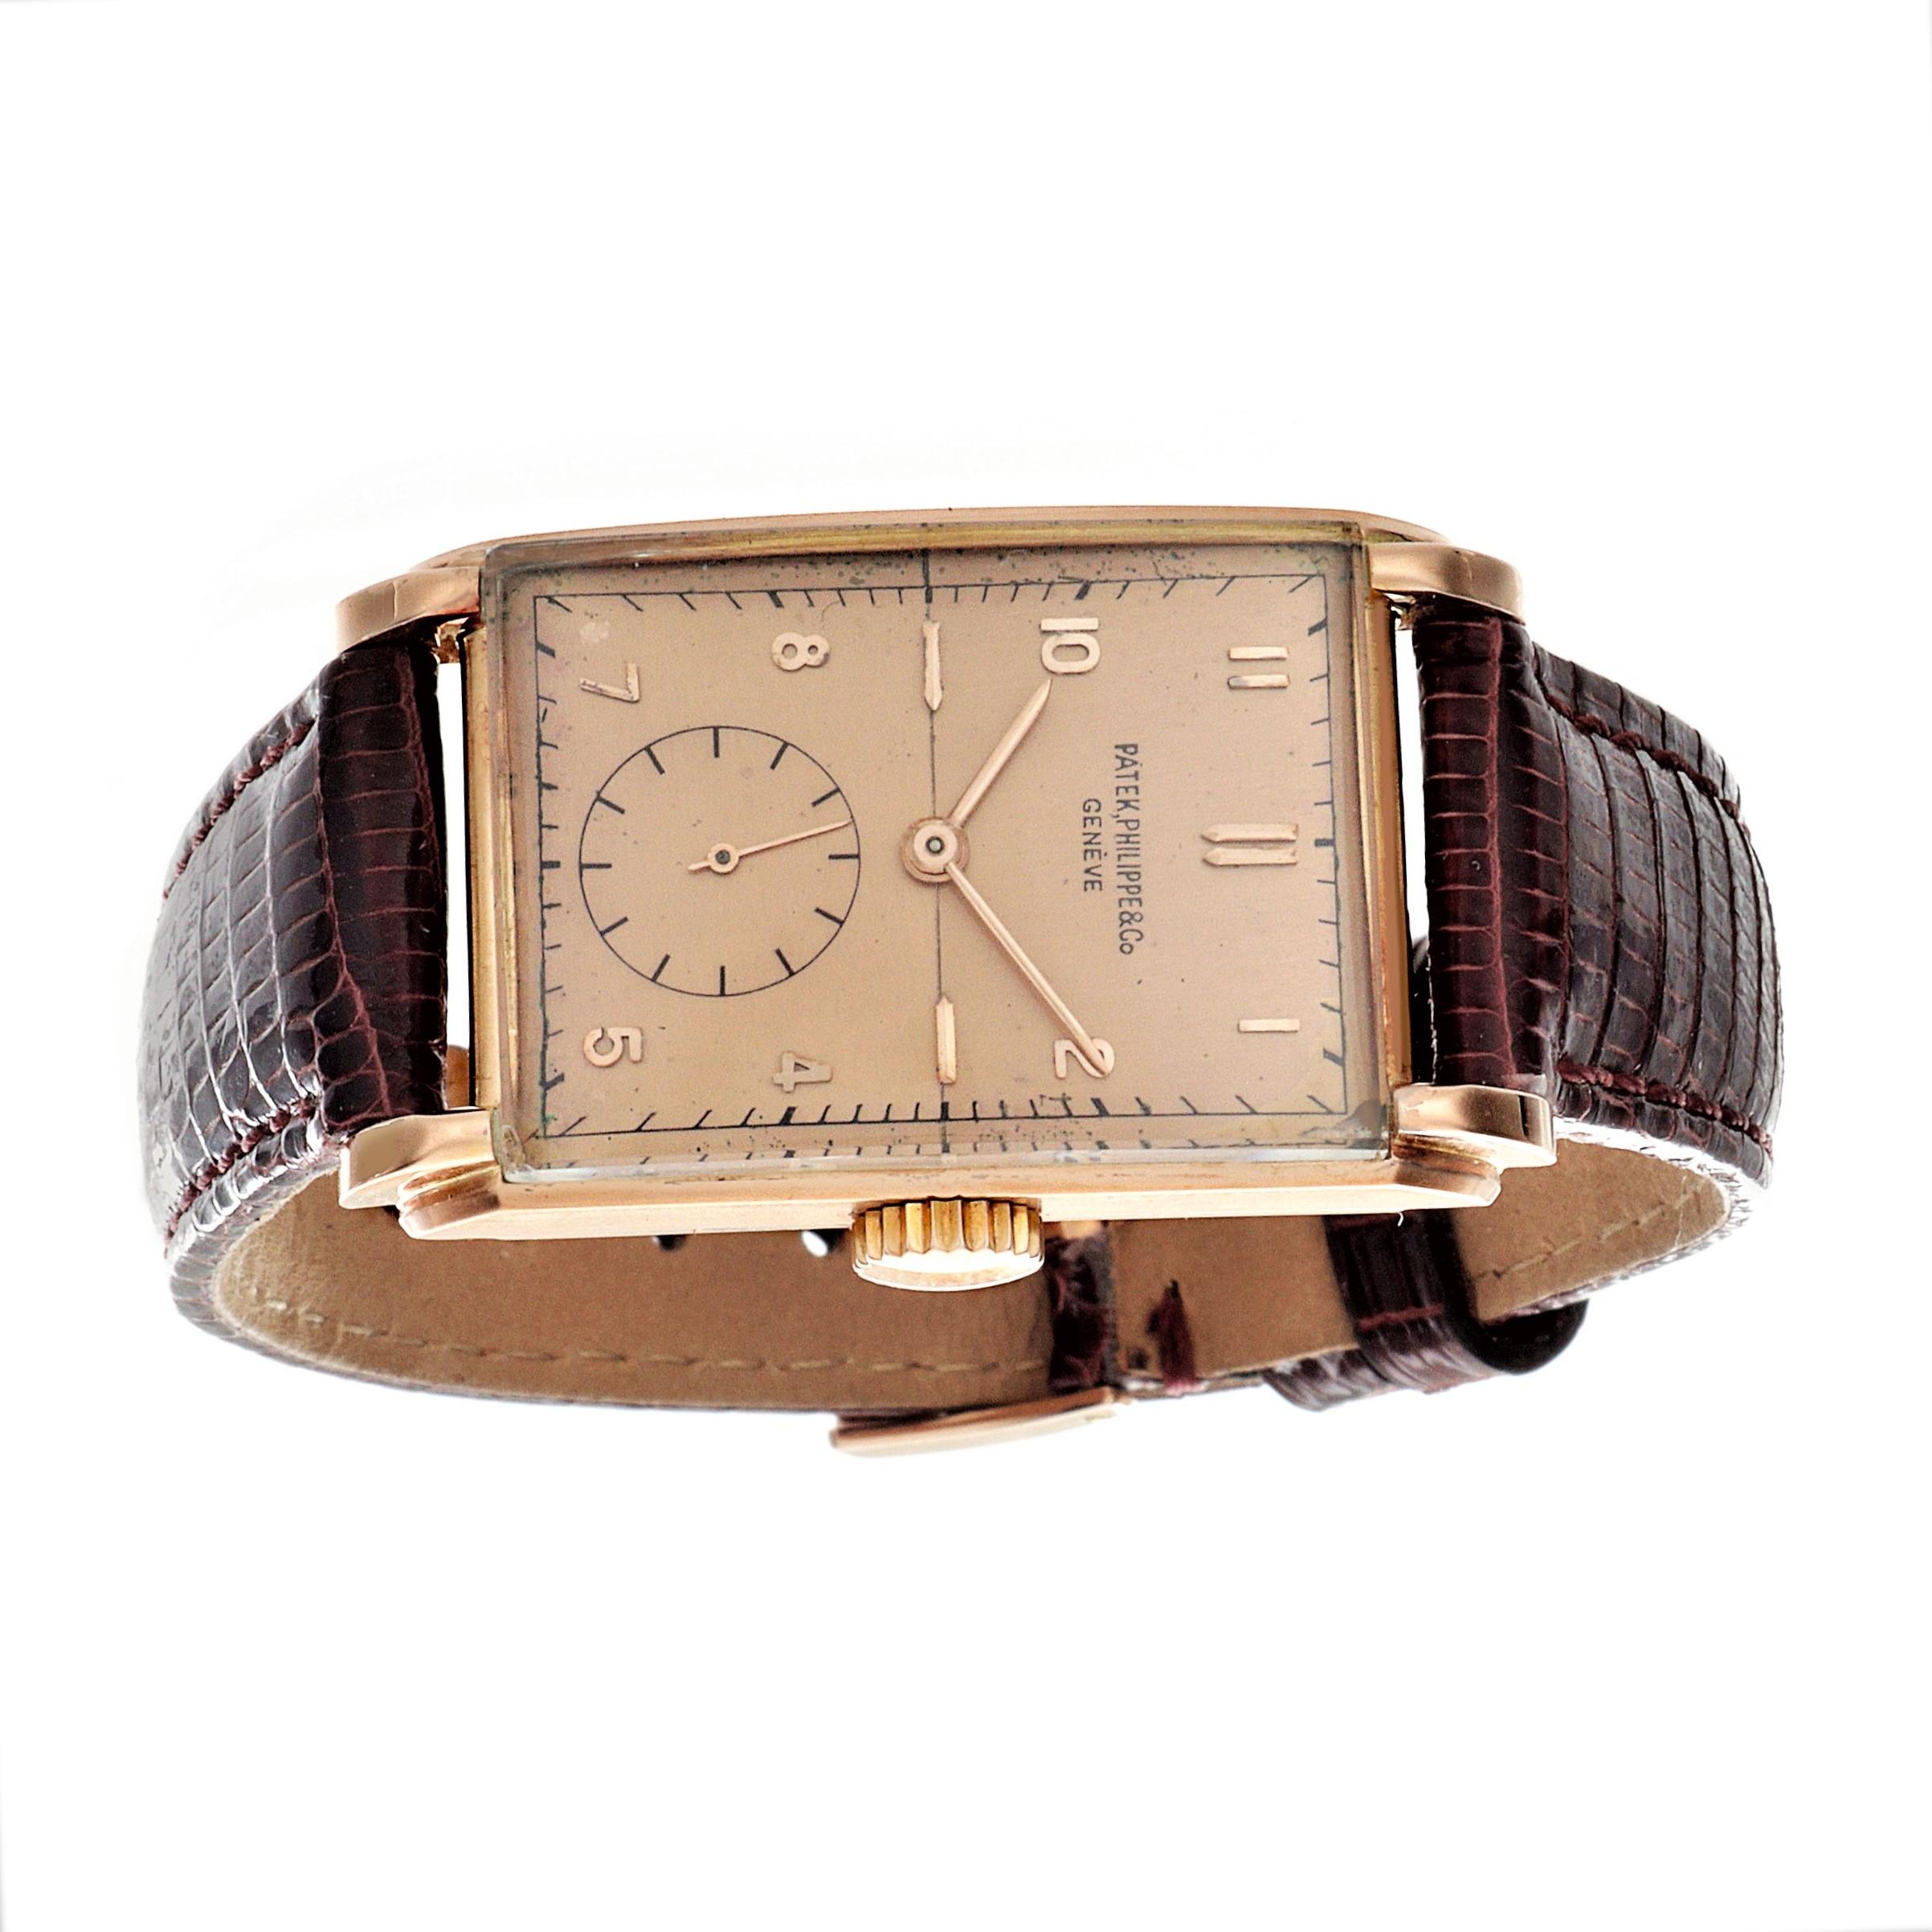 Introduction:
Patek Philippe 1559R, 18 Karat rose gold large rectangular watch measuring 39 x 23 mm with original rose salmon dial, raised rose gold indexes and hands.  The watch was made in 1947 and is fitted with a 9